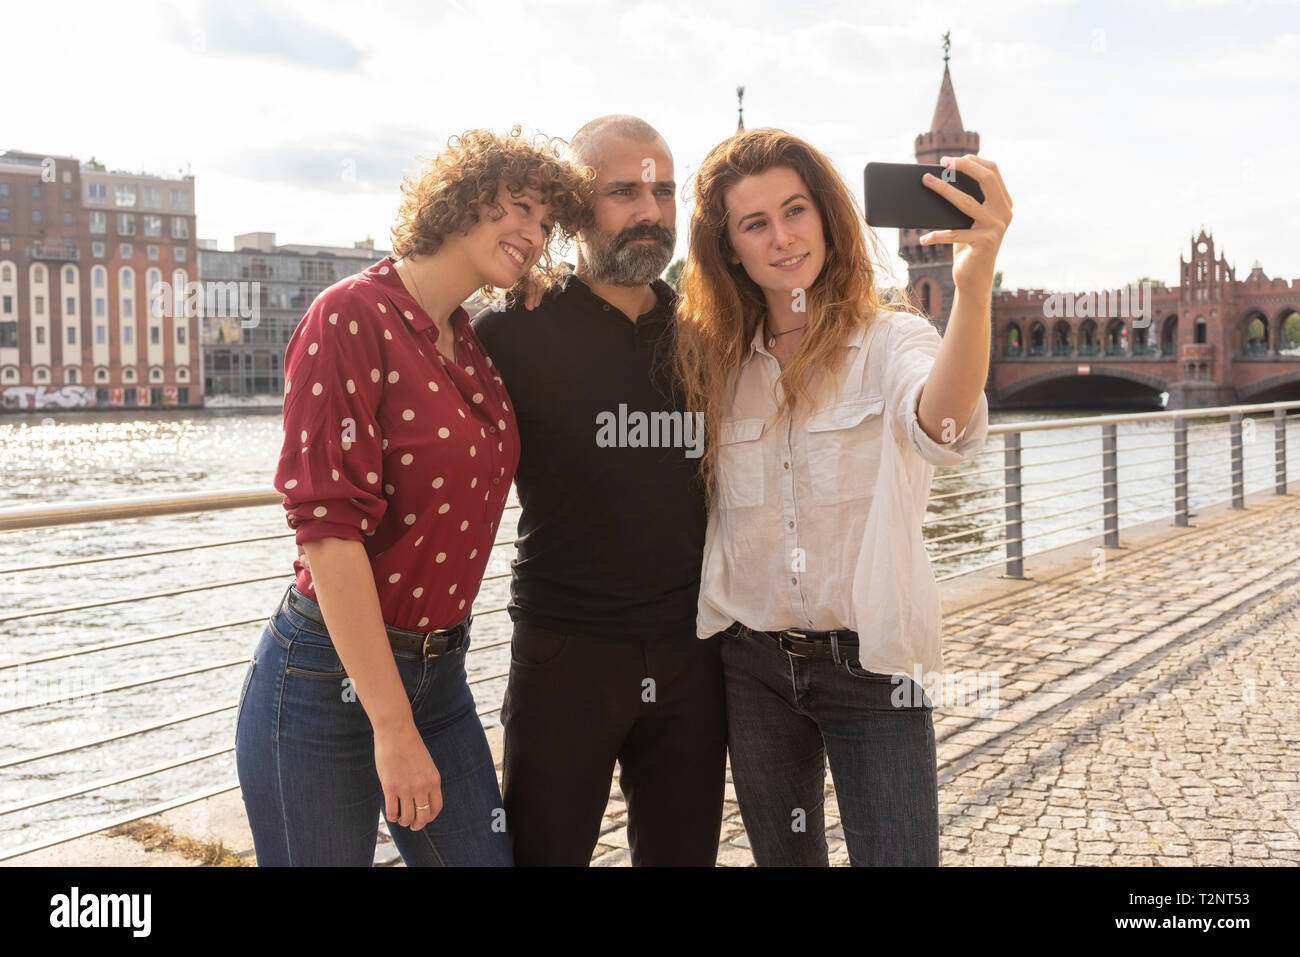 Man and female friends taking selfie with smartphone on bridge, river and buildings in background, Berlin, Germany Stock Photo